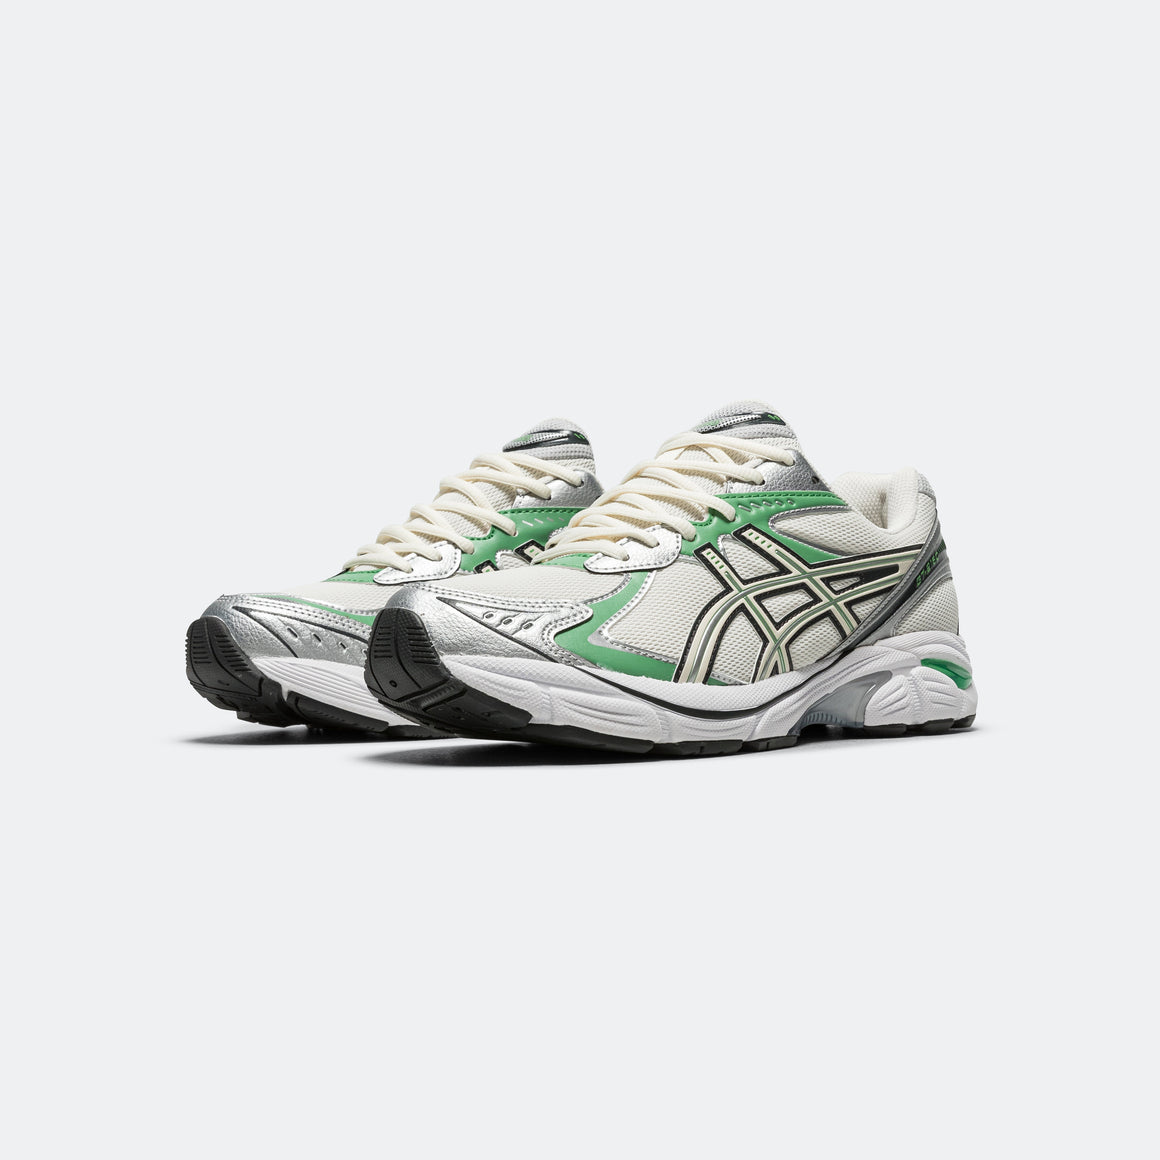 Asics - GT-2160 - Cream/Bamboo - UP THERE